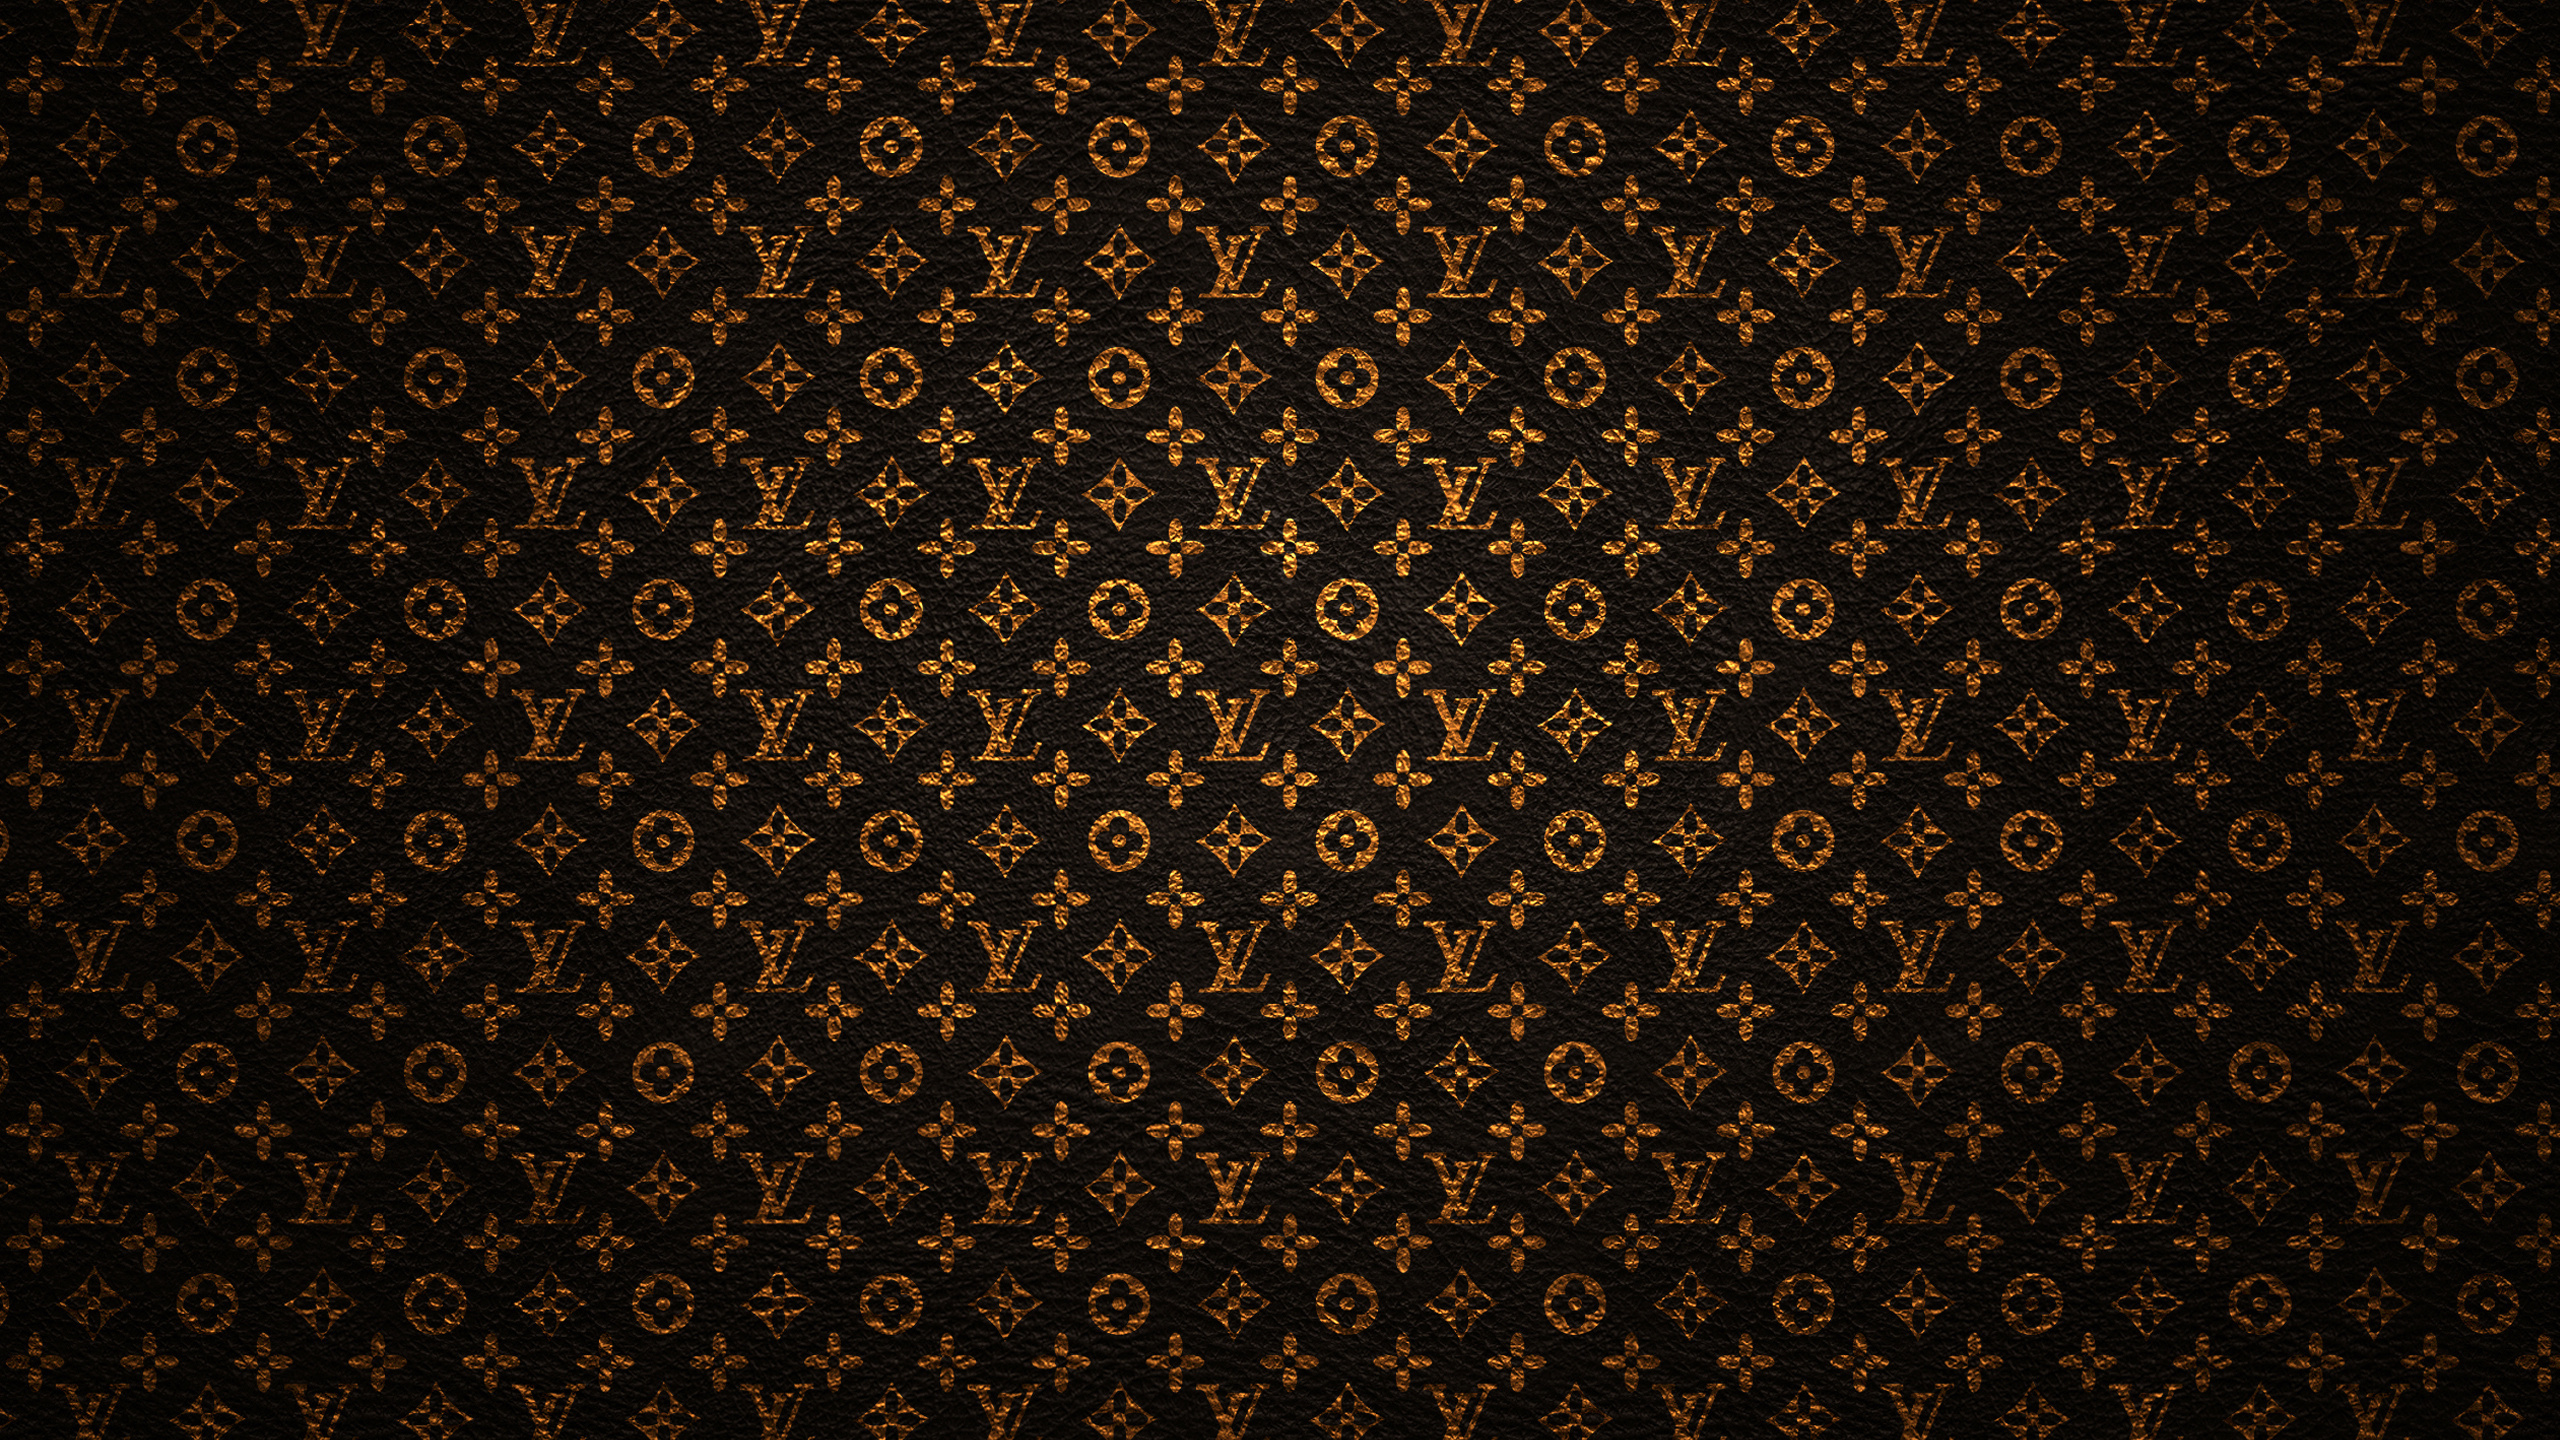 10+ Louis Vuitton HD Wallpapers and Backgrounds